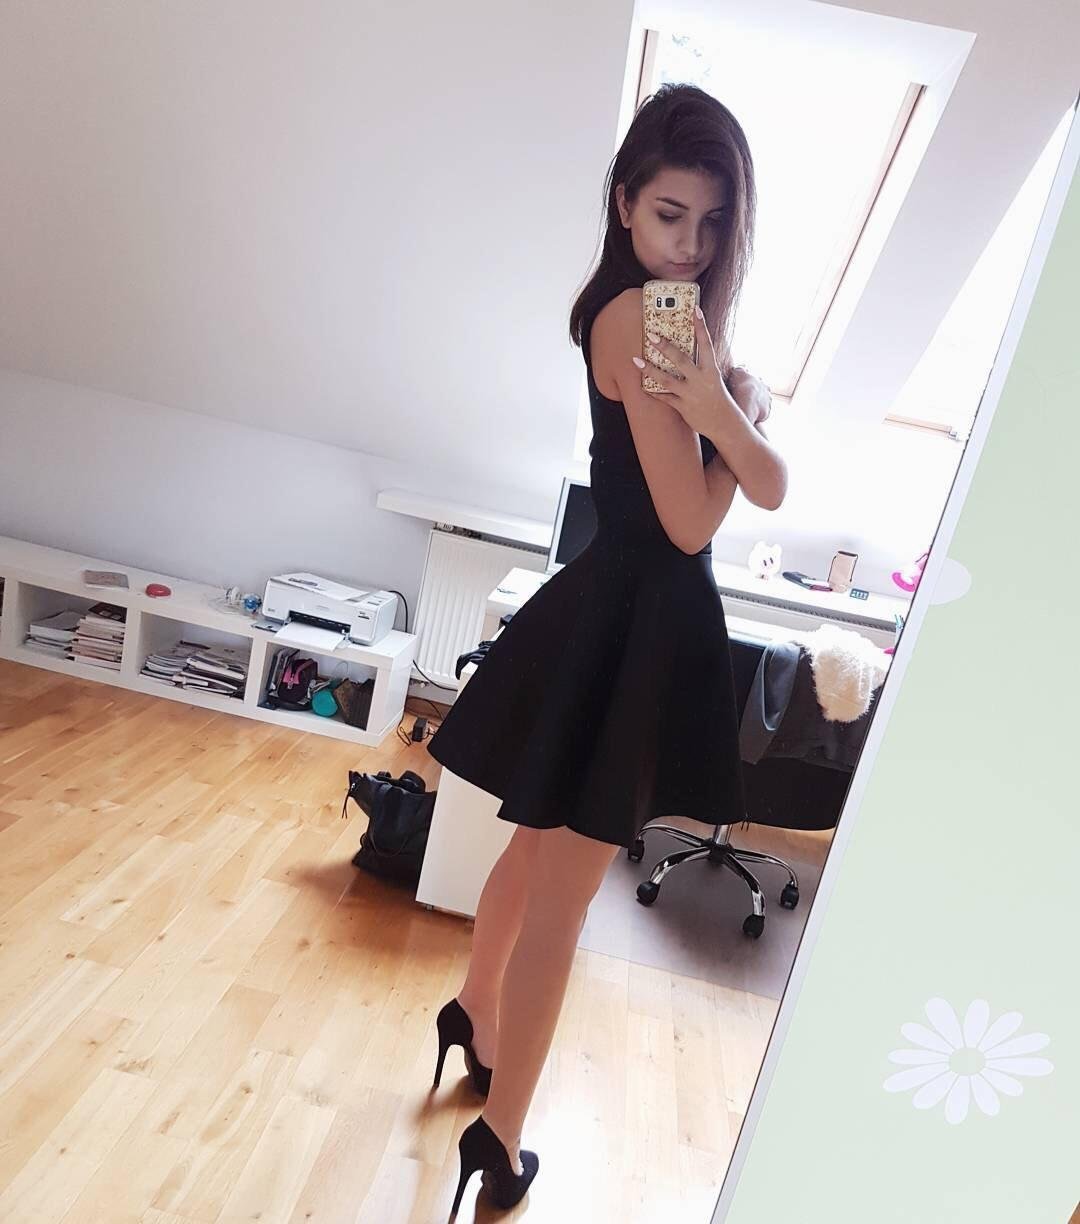 Wow in those heels